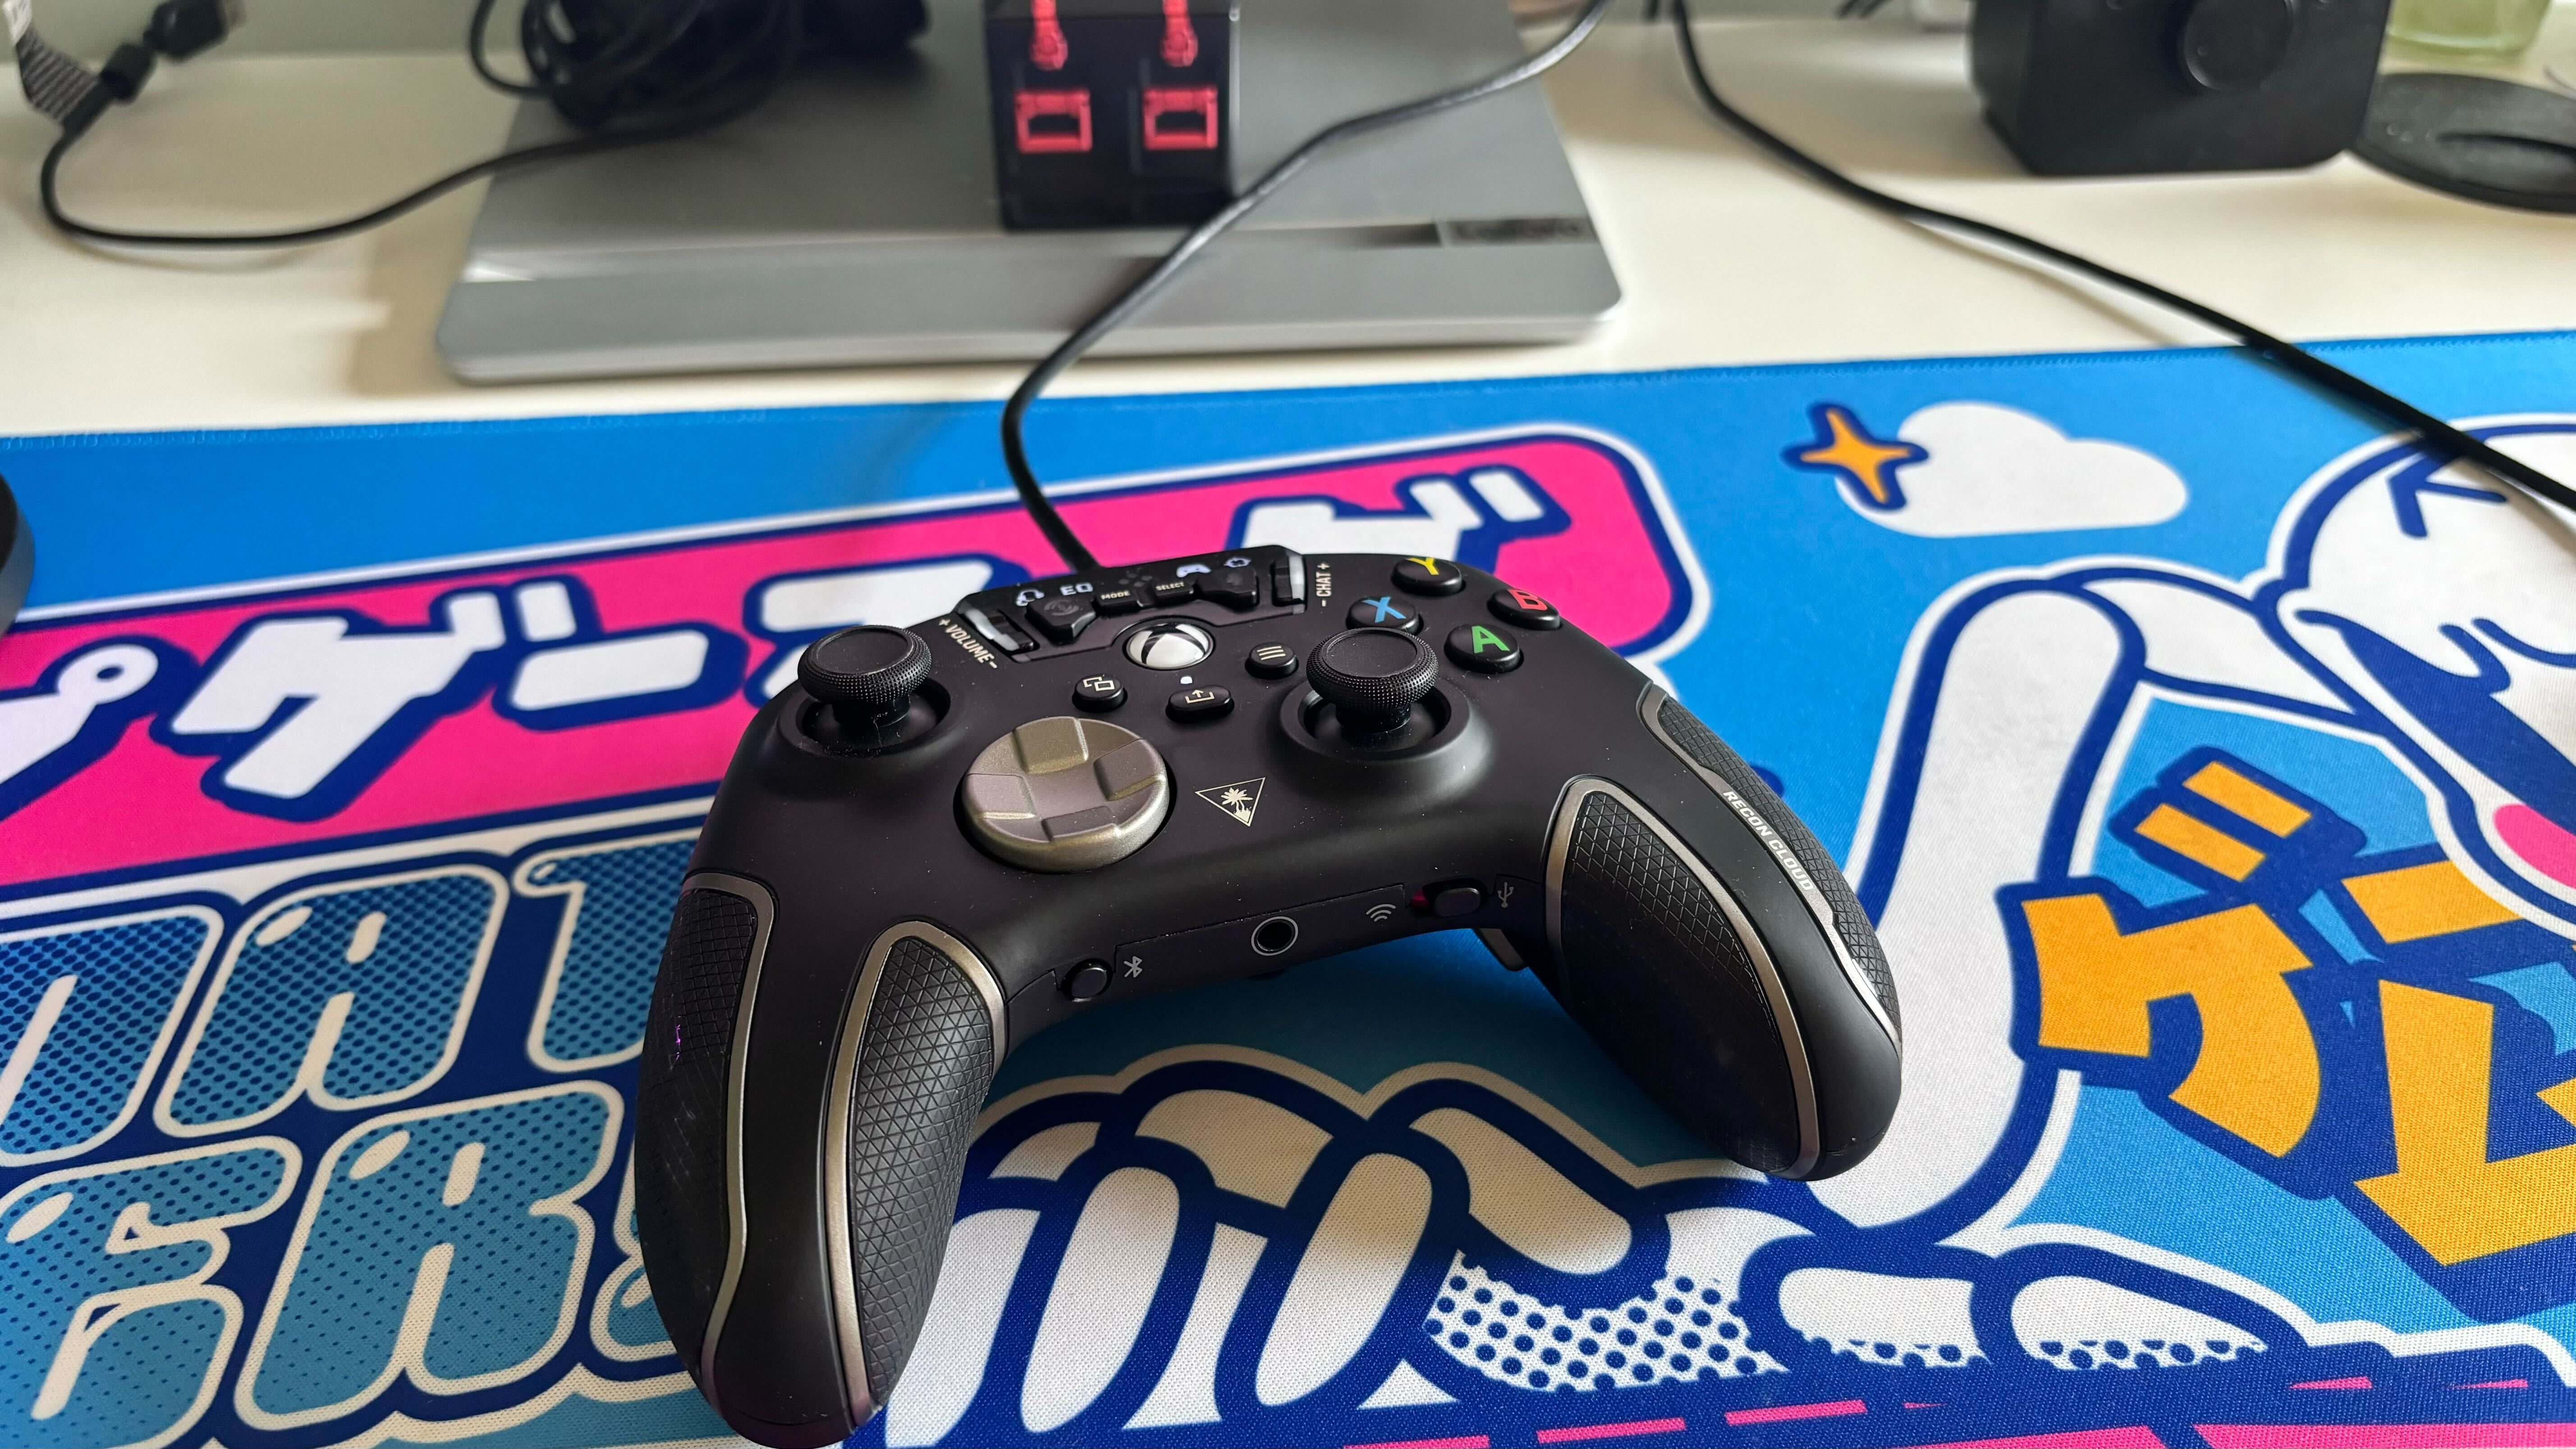 The Turtle Beach Recon Cloud Controller being used with a PC.